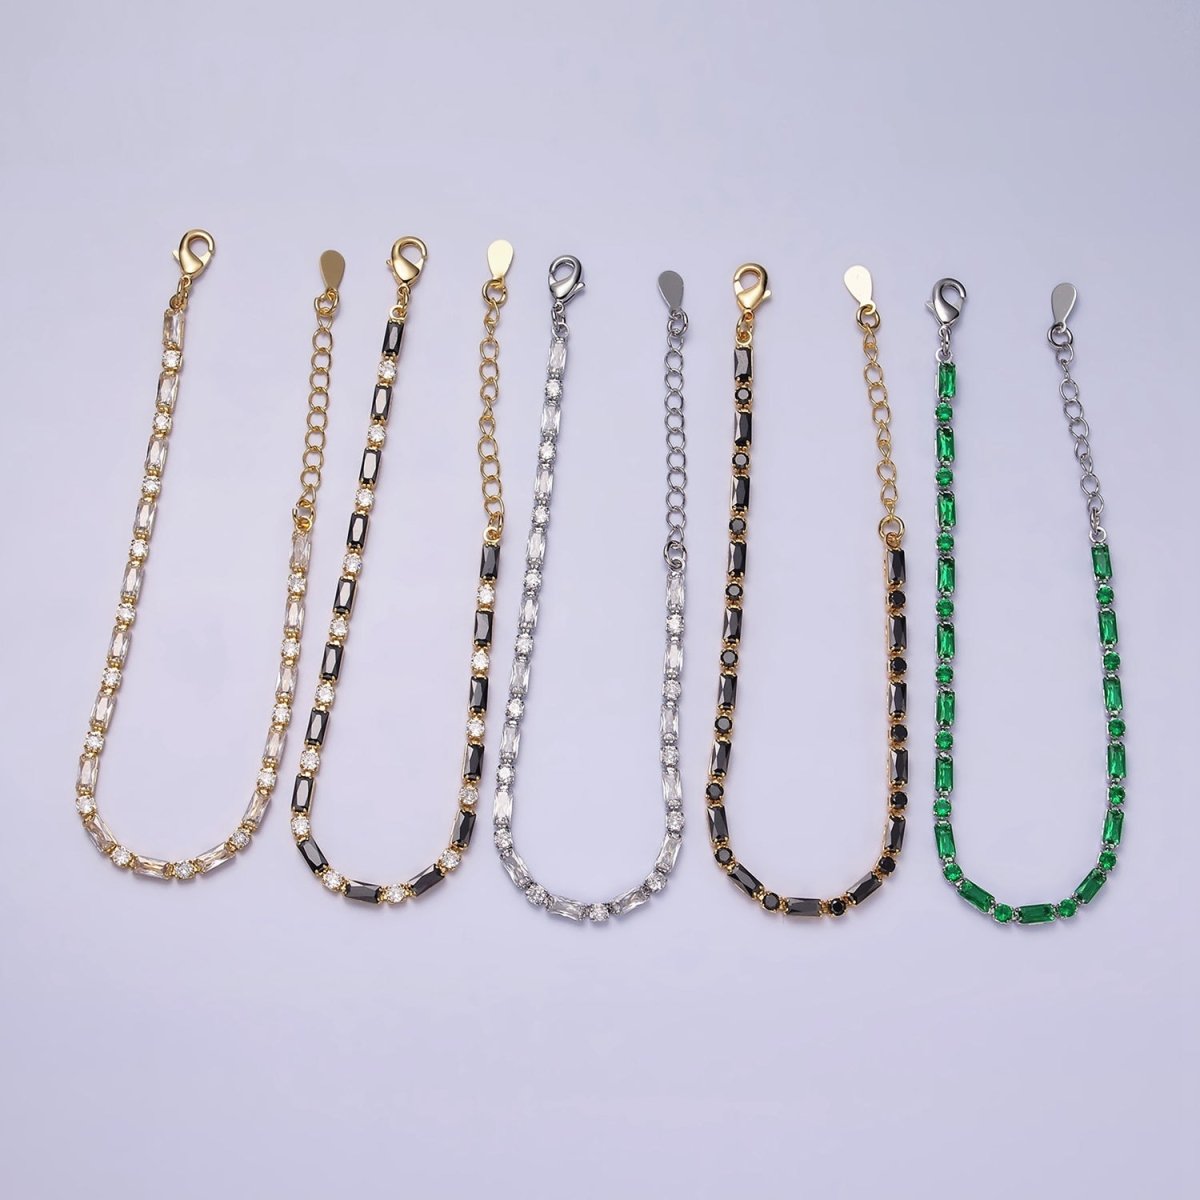 16K Gold Filled Green, Checkered, Black, Clear, Pink 2.5mm Baguette Round CZ 6.5 Inch Tennis Chain Bracelet | WA-1813 - WA-1831 Clearance Pricing - DLUXCA